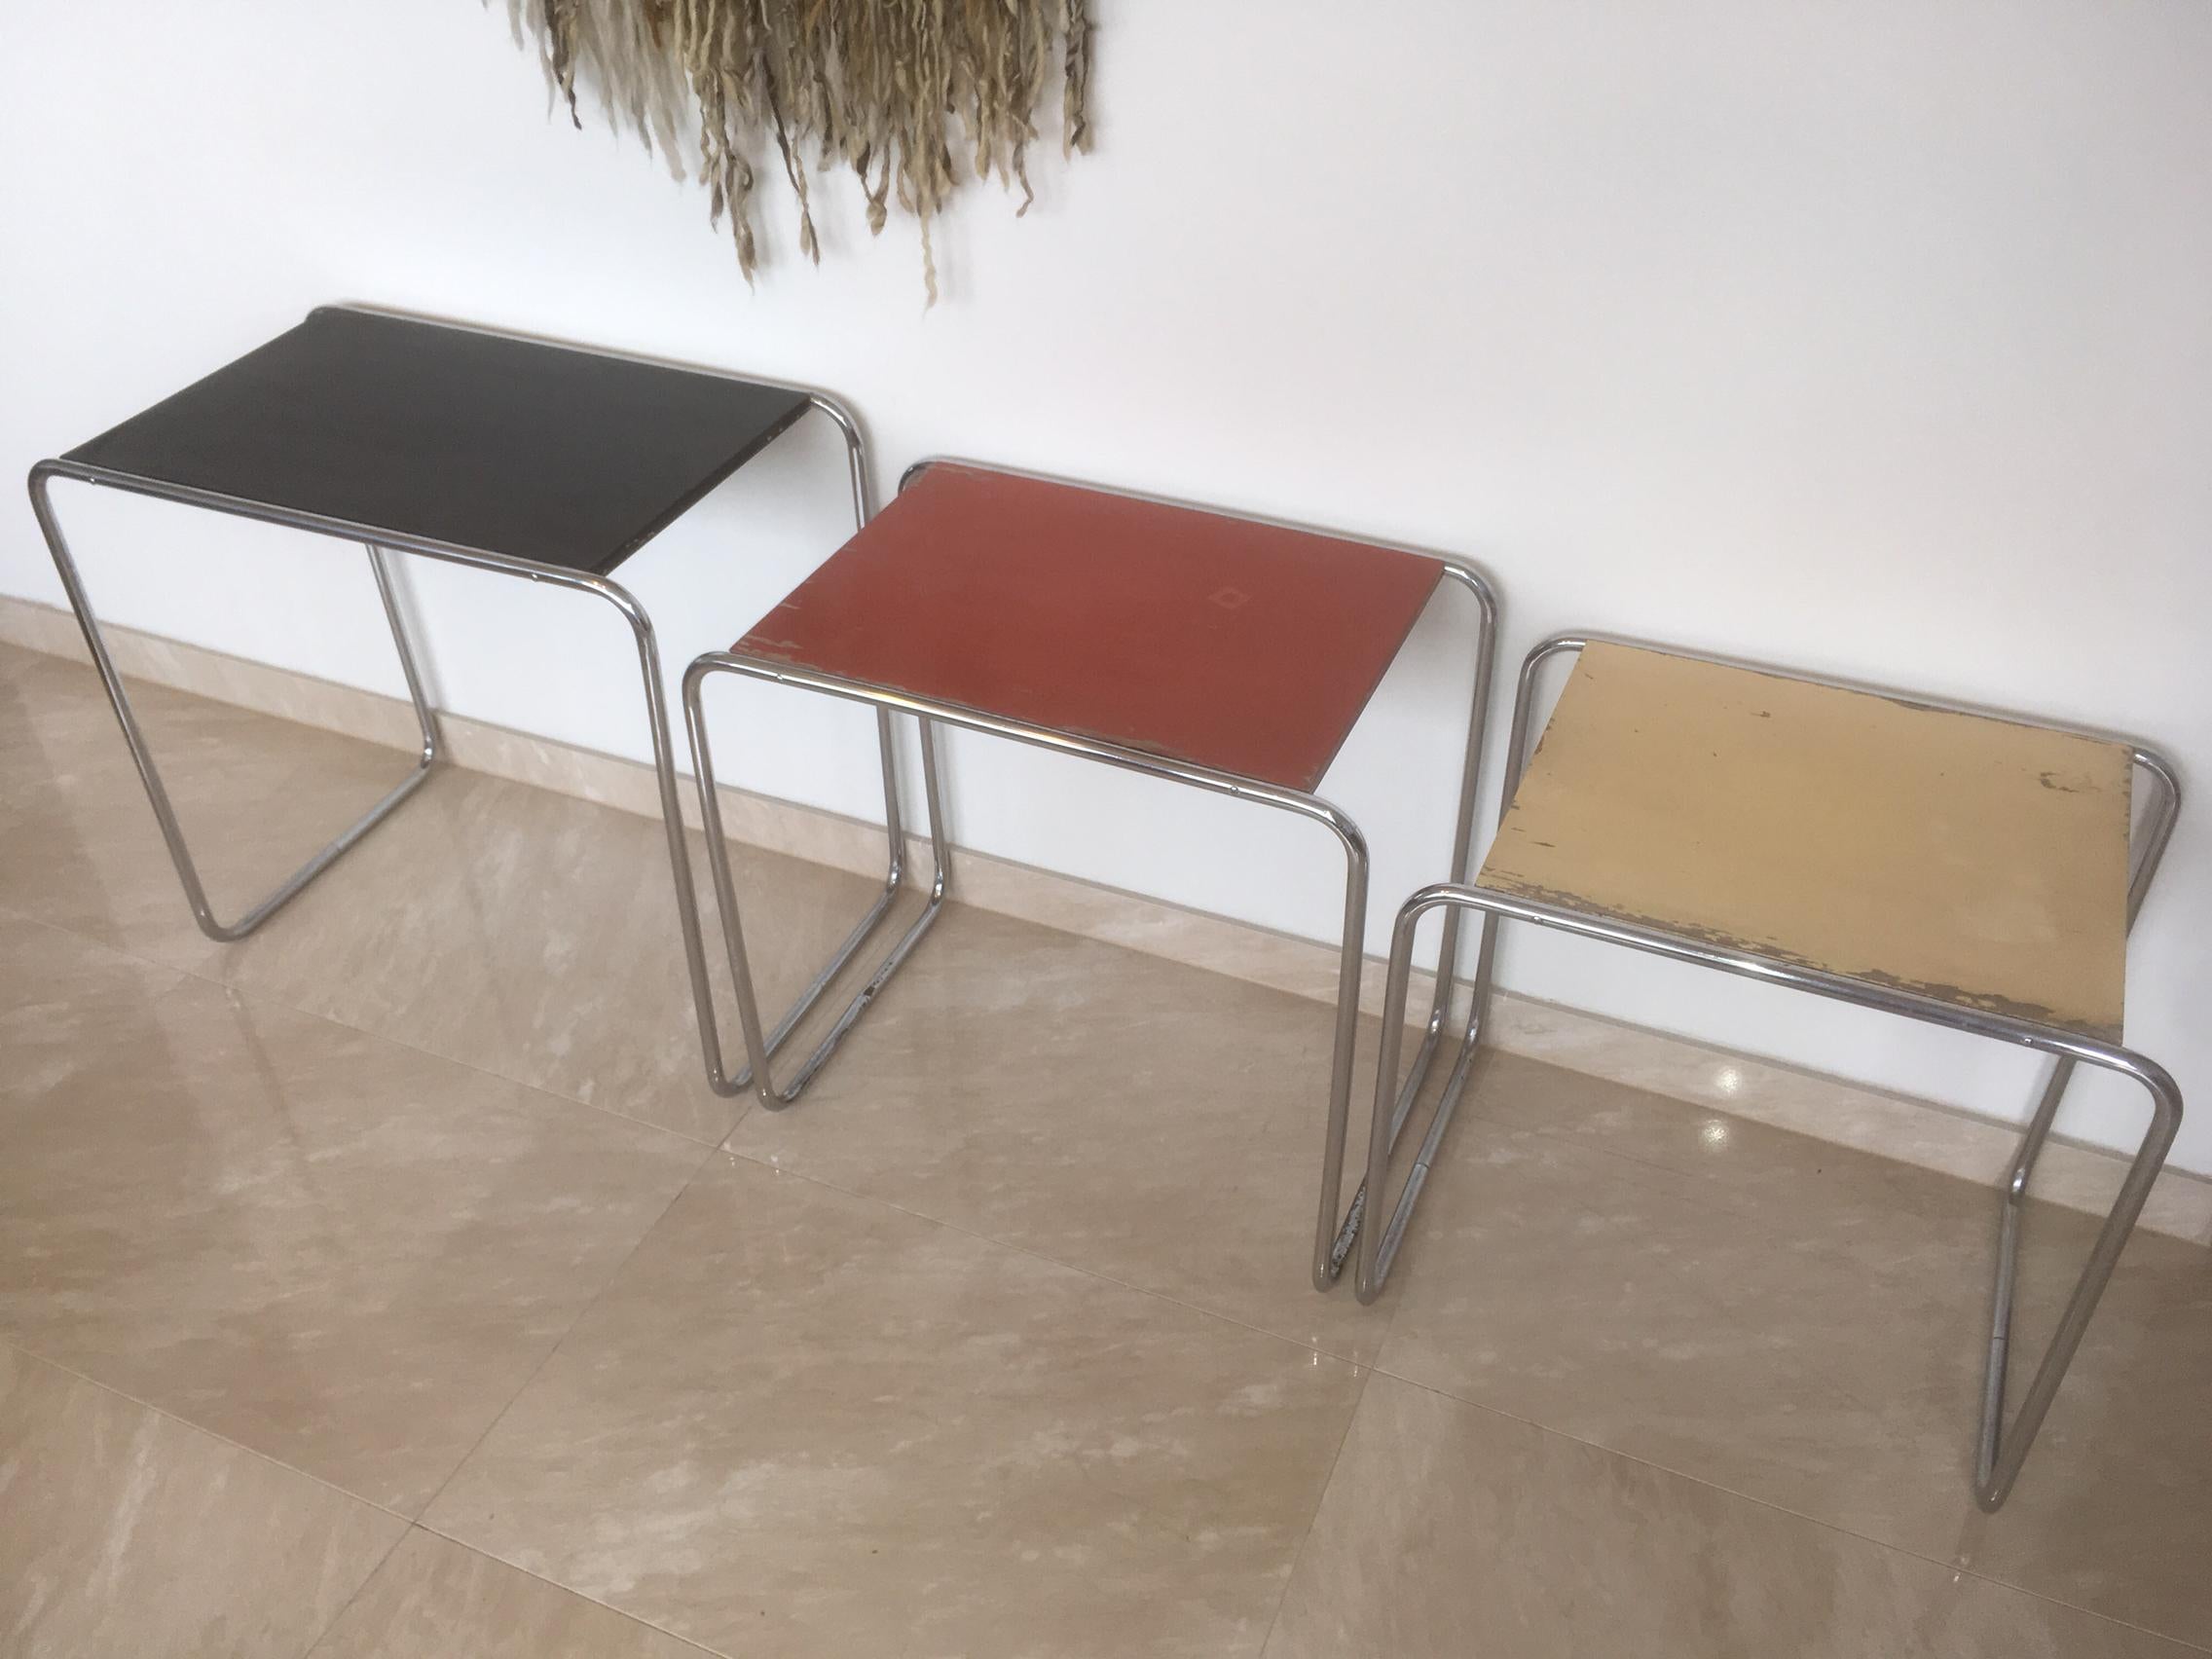 Czech Extremely Rare Bauhaus Colored Nesting Tables B9, Marcel Breuer/ Thonet License